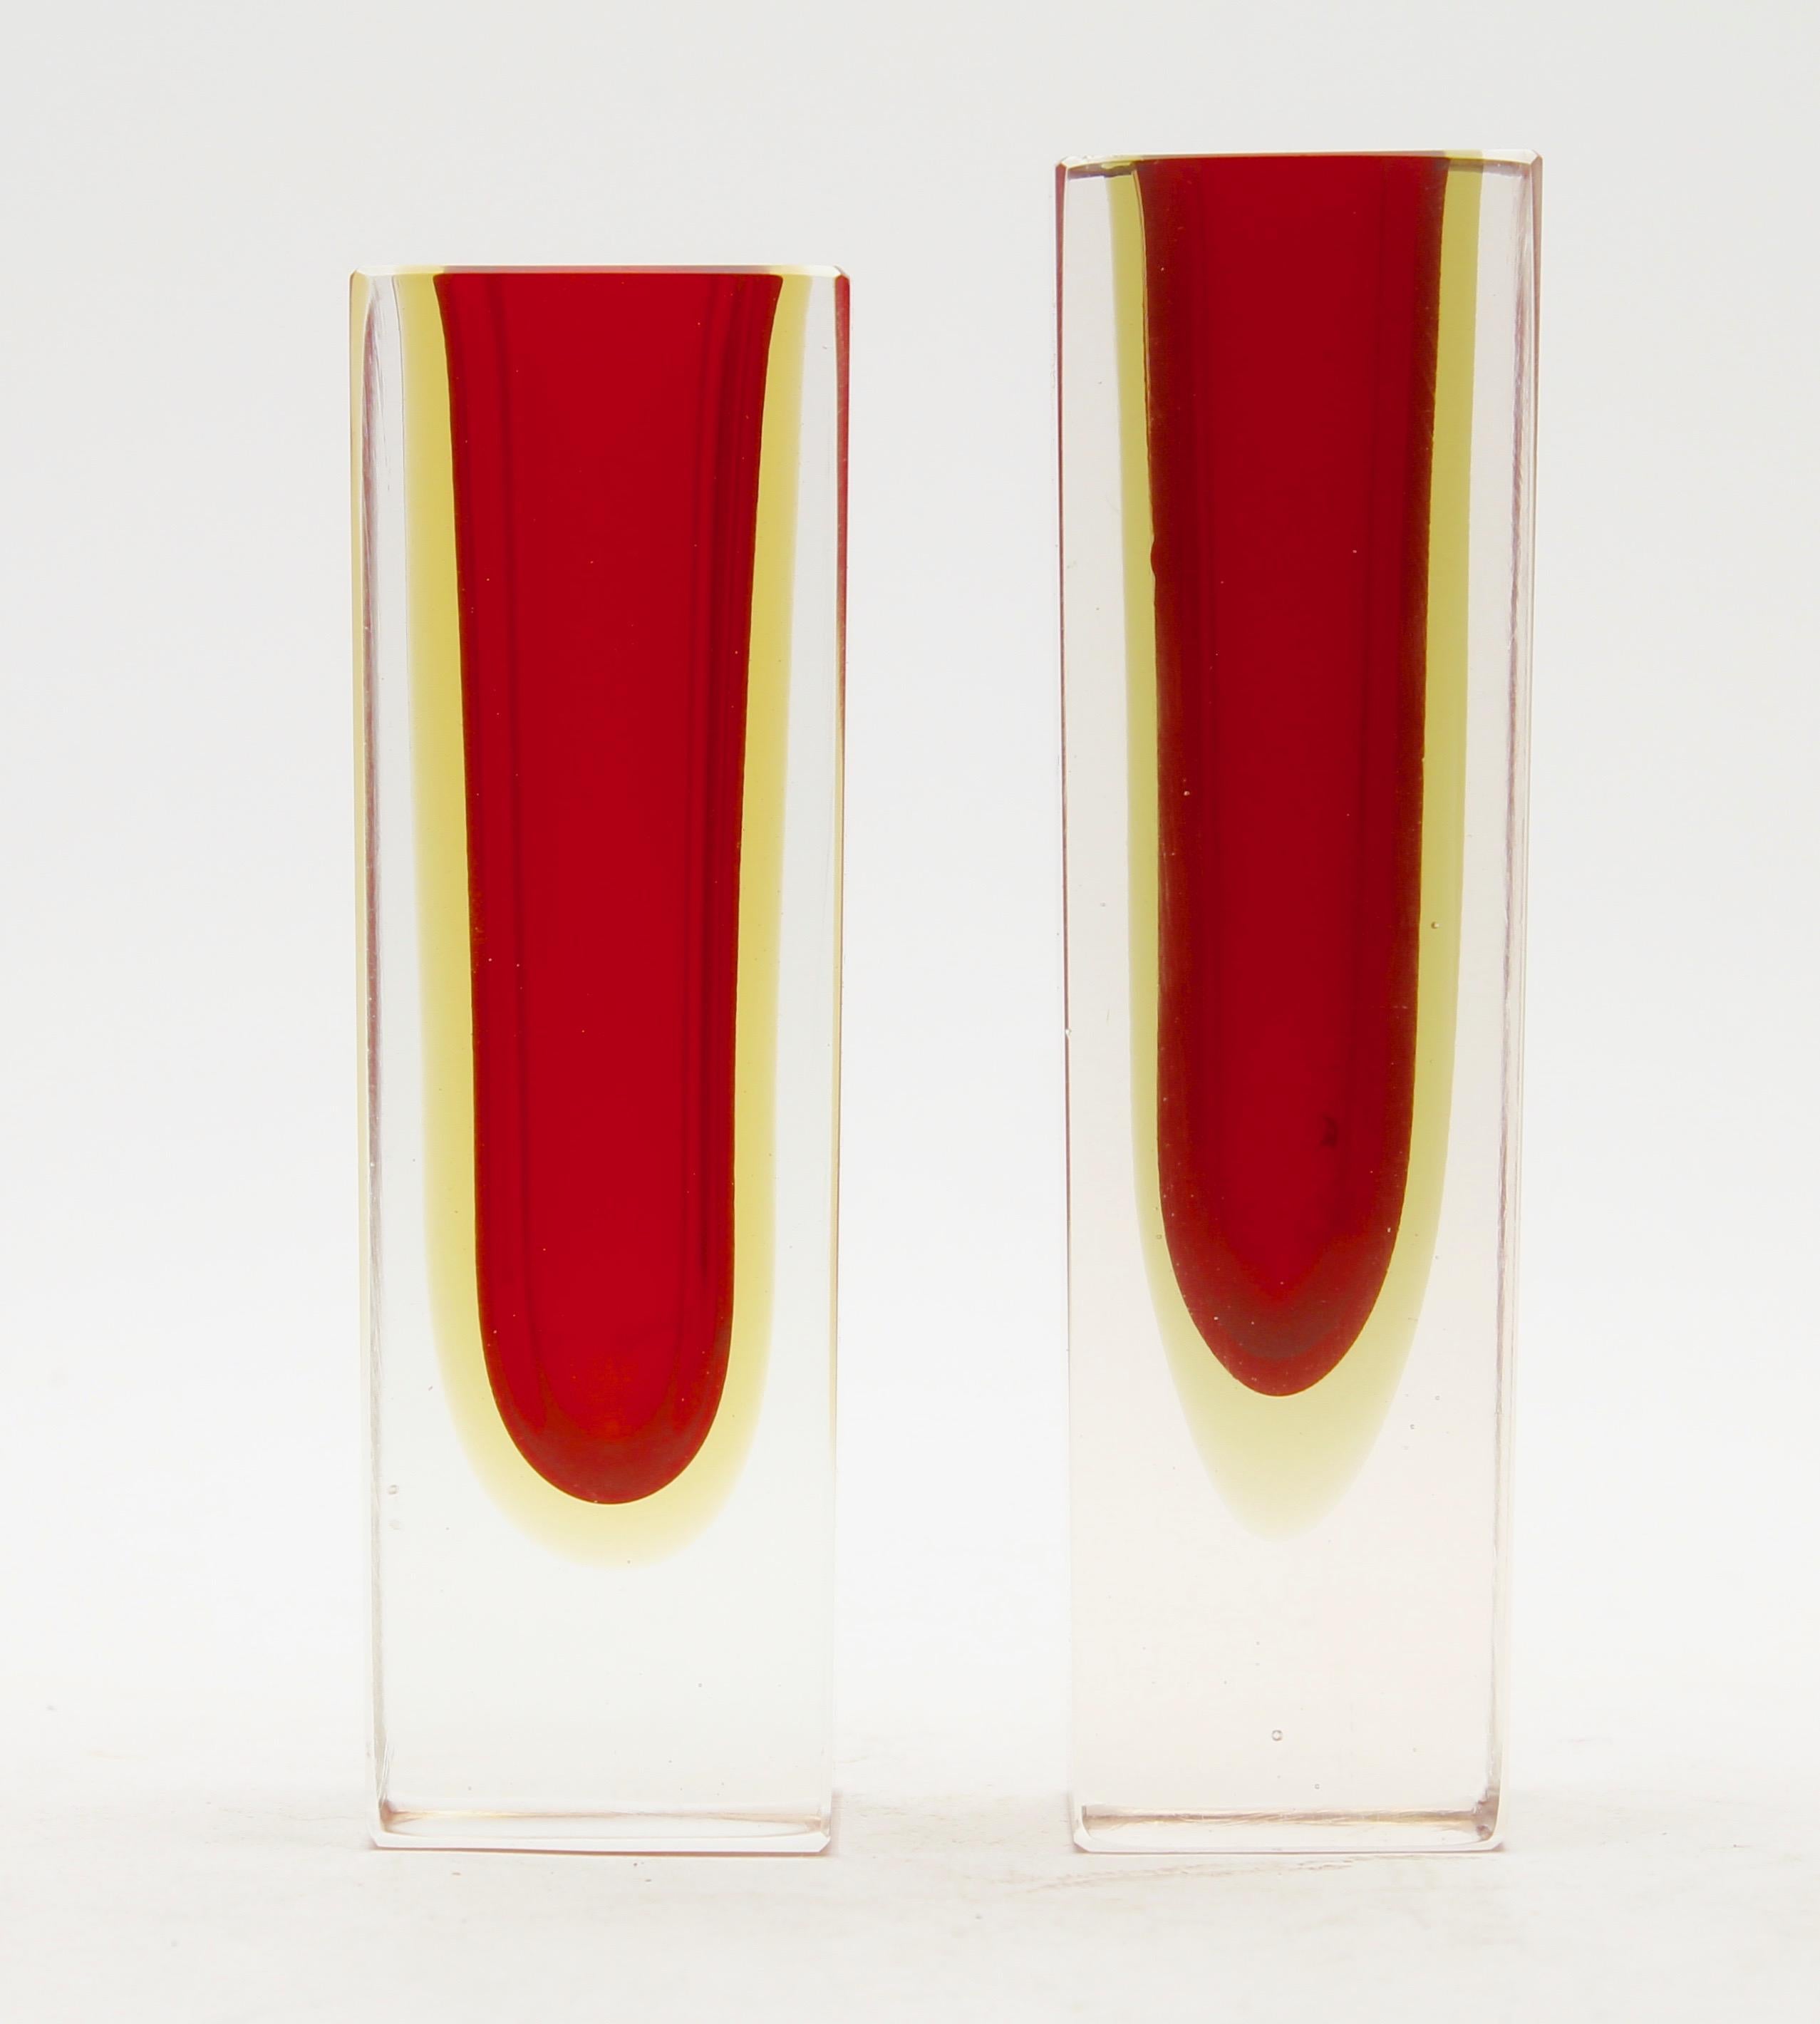 Two similar block vases after the design by Flavio Poli for Mandruzzato, each with a diffused amber color around the red core.
This iconic Murano design takes a Minimalist approach to glass design and turns the focus to the skills of the master